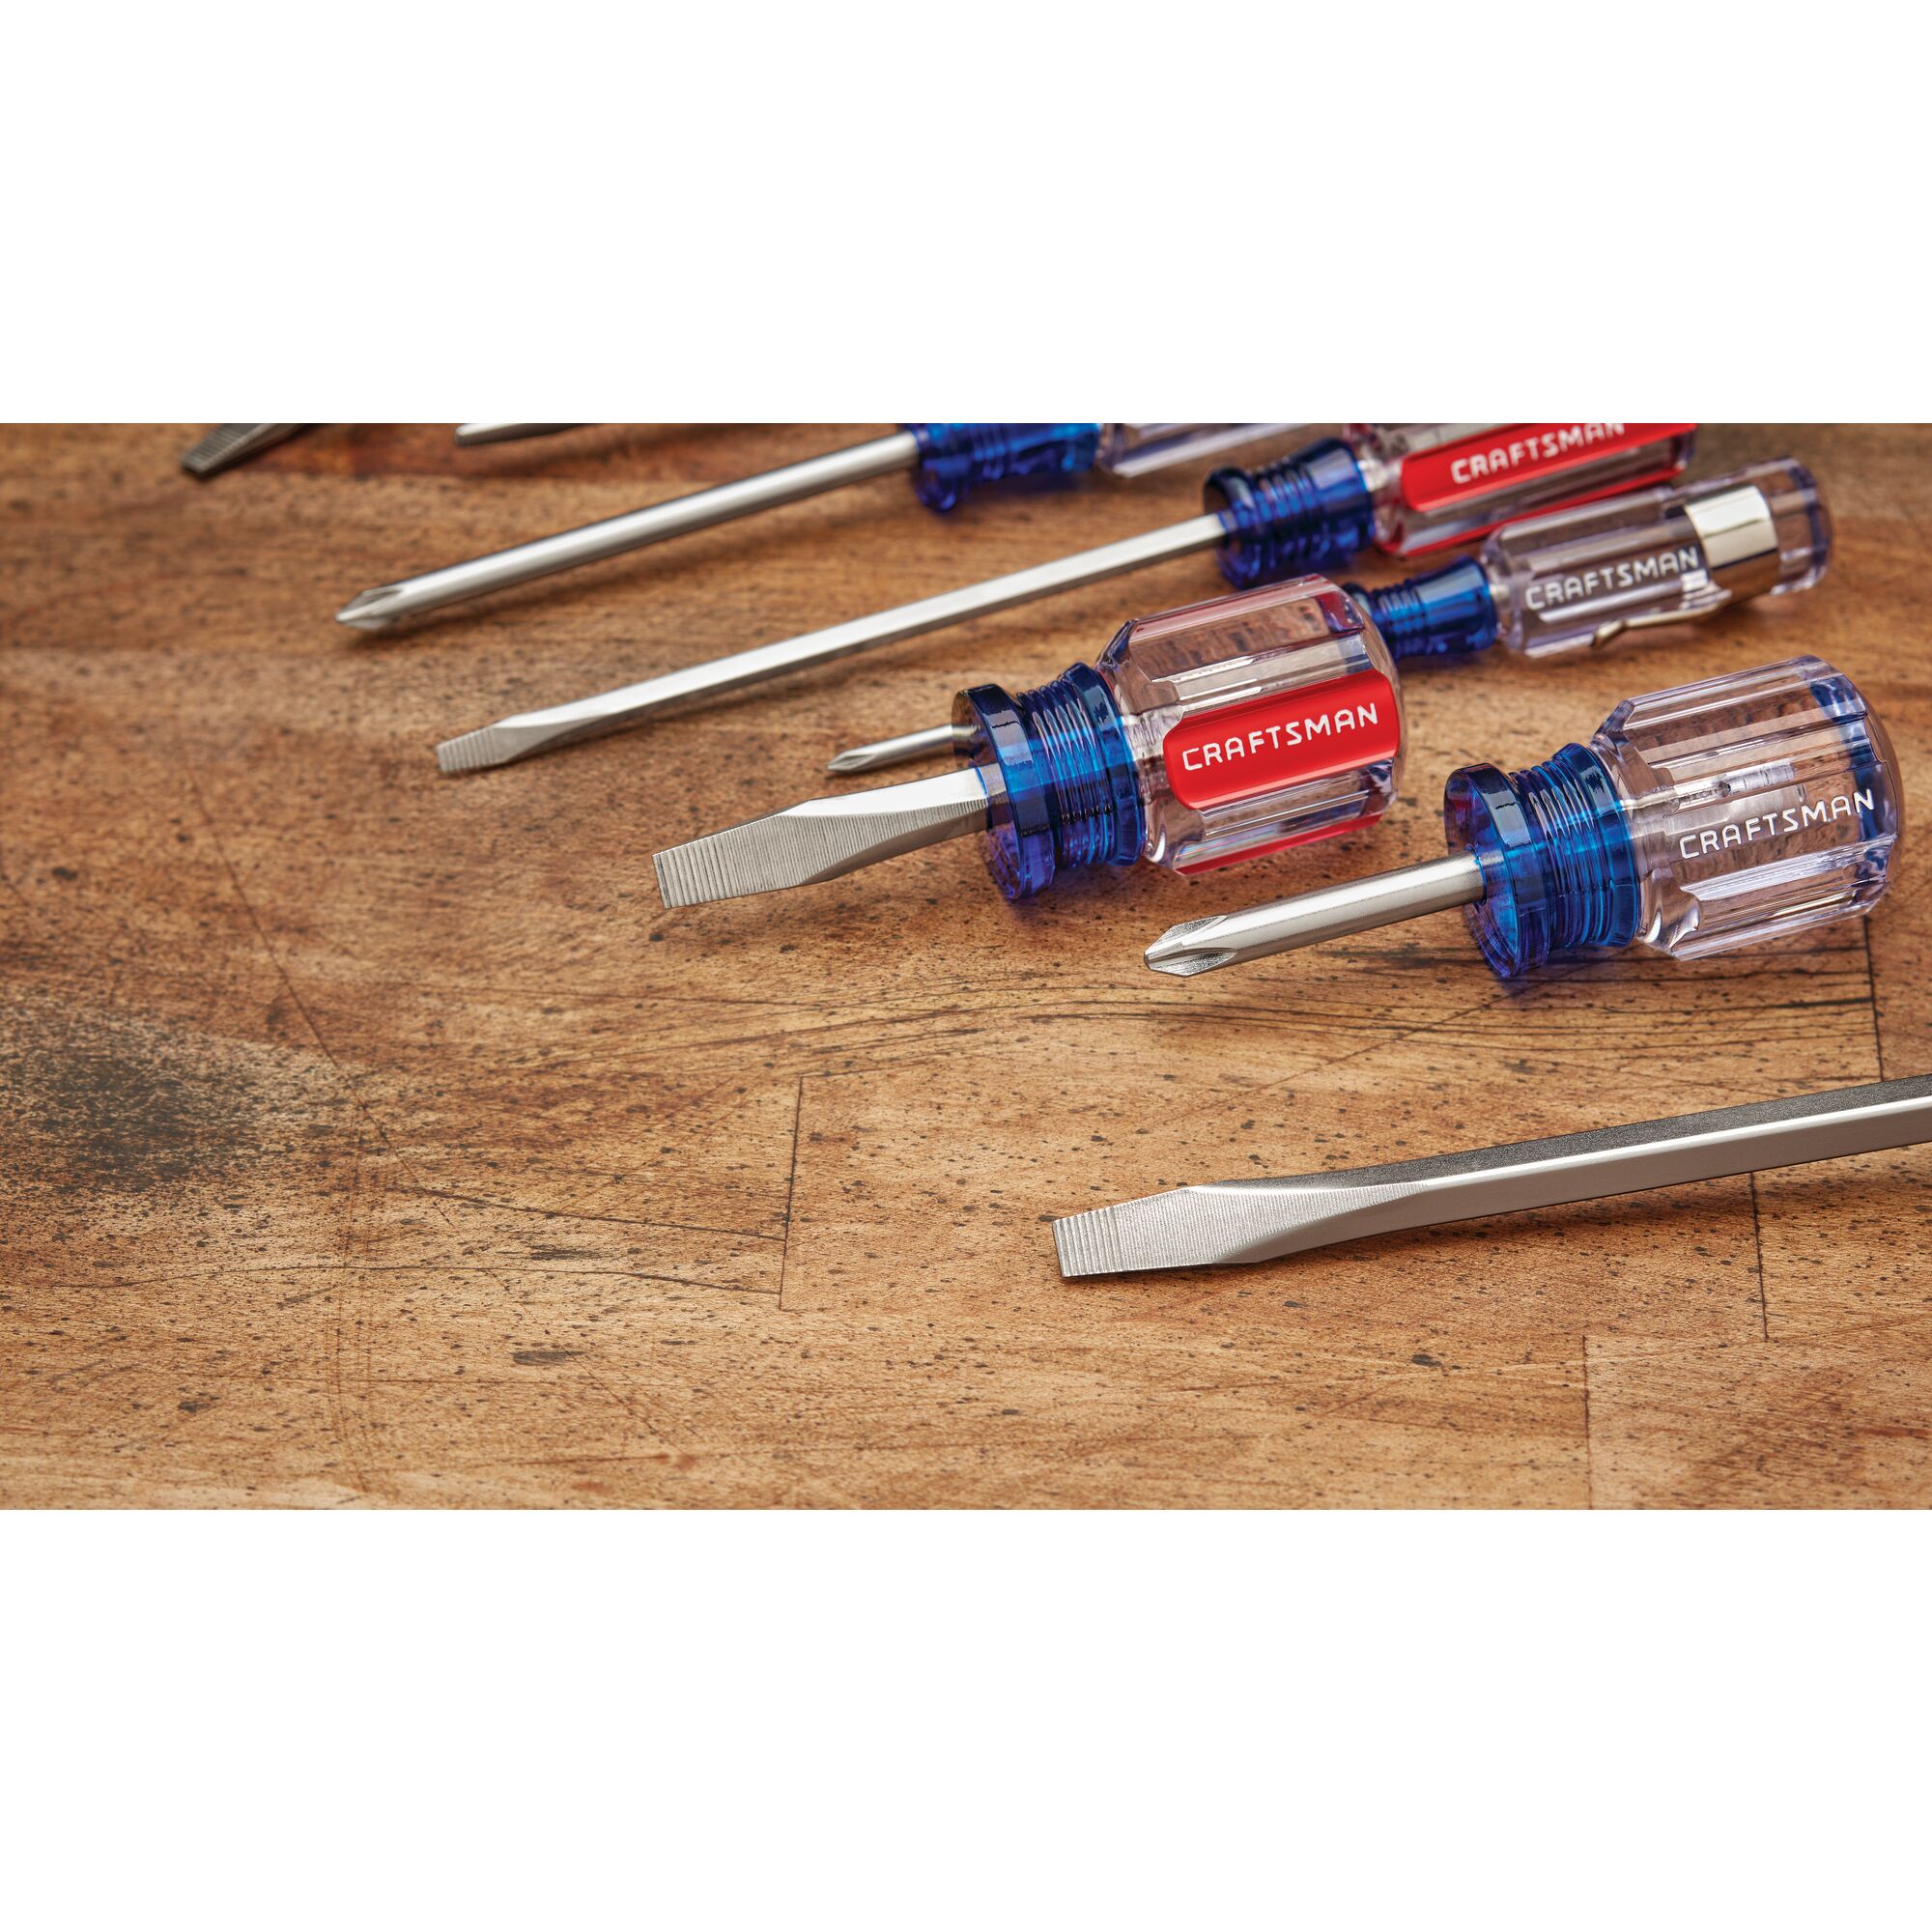 View of CRAFTSMAN Screwdrivers: Acetate highlighting product features